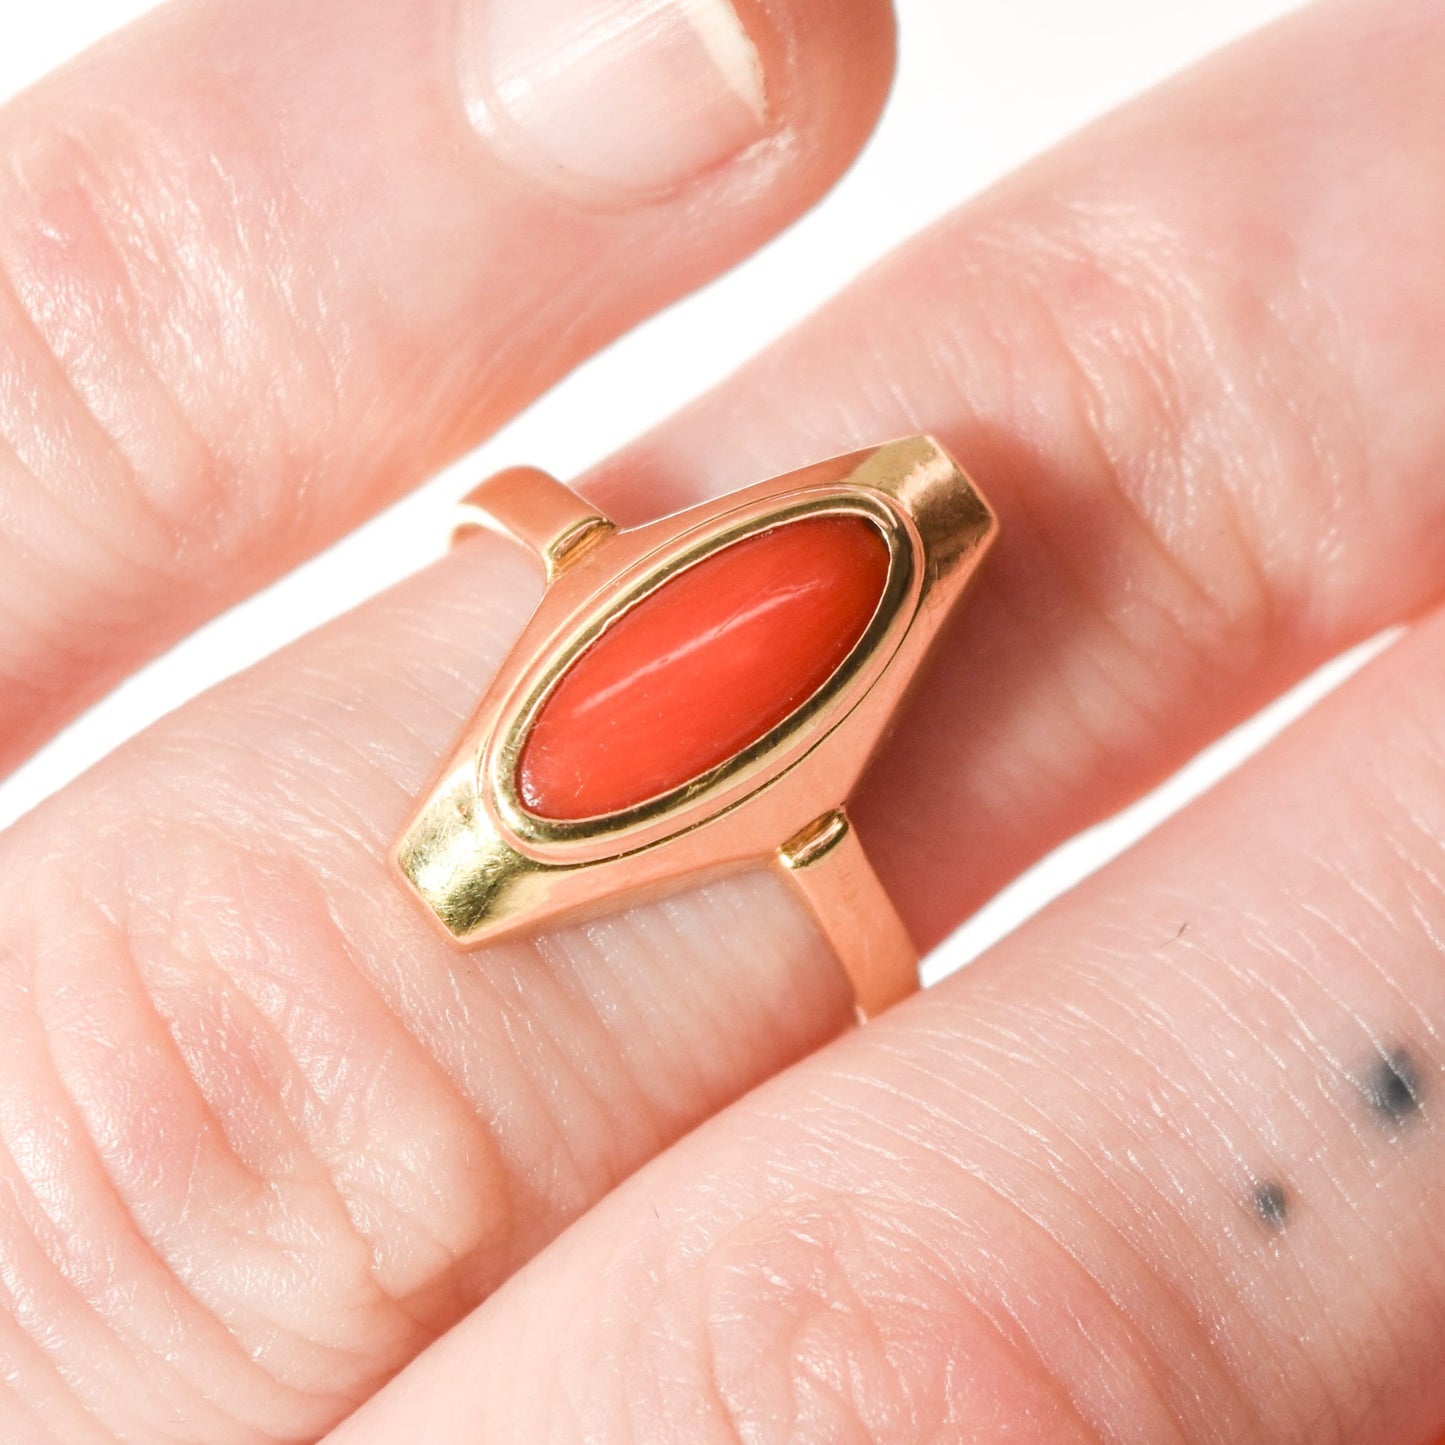 Estate 18K Coral Marquise Ring on Finger, Yellow Gold Red Coral Ring Size 5.25 US, Elegant Women's Jewelry